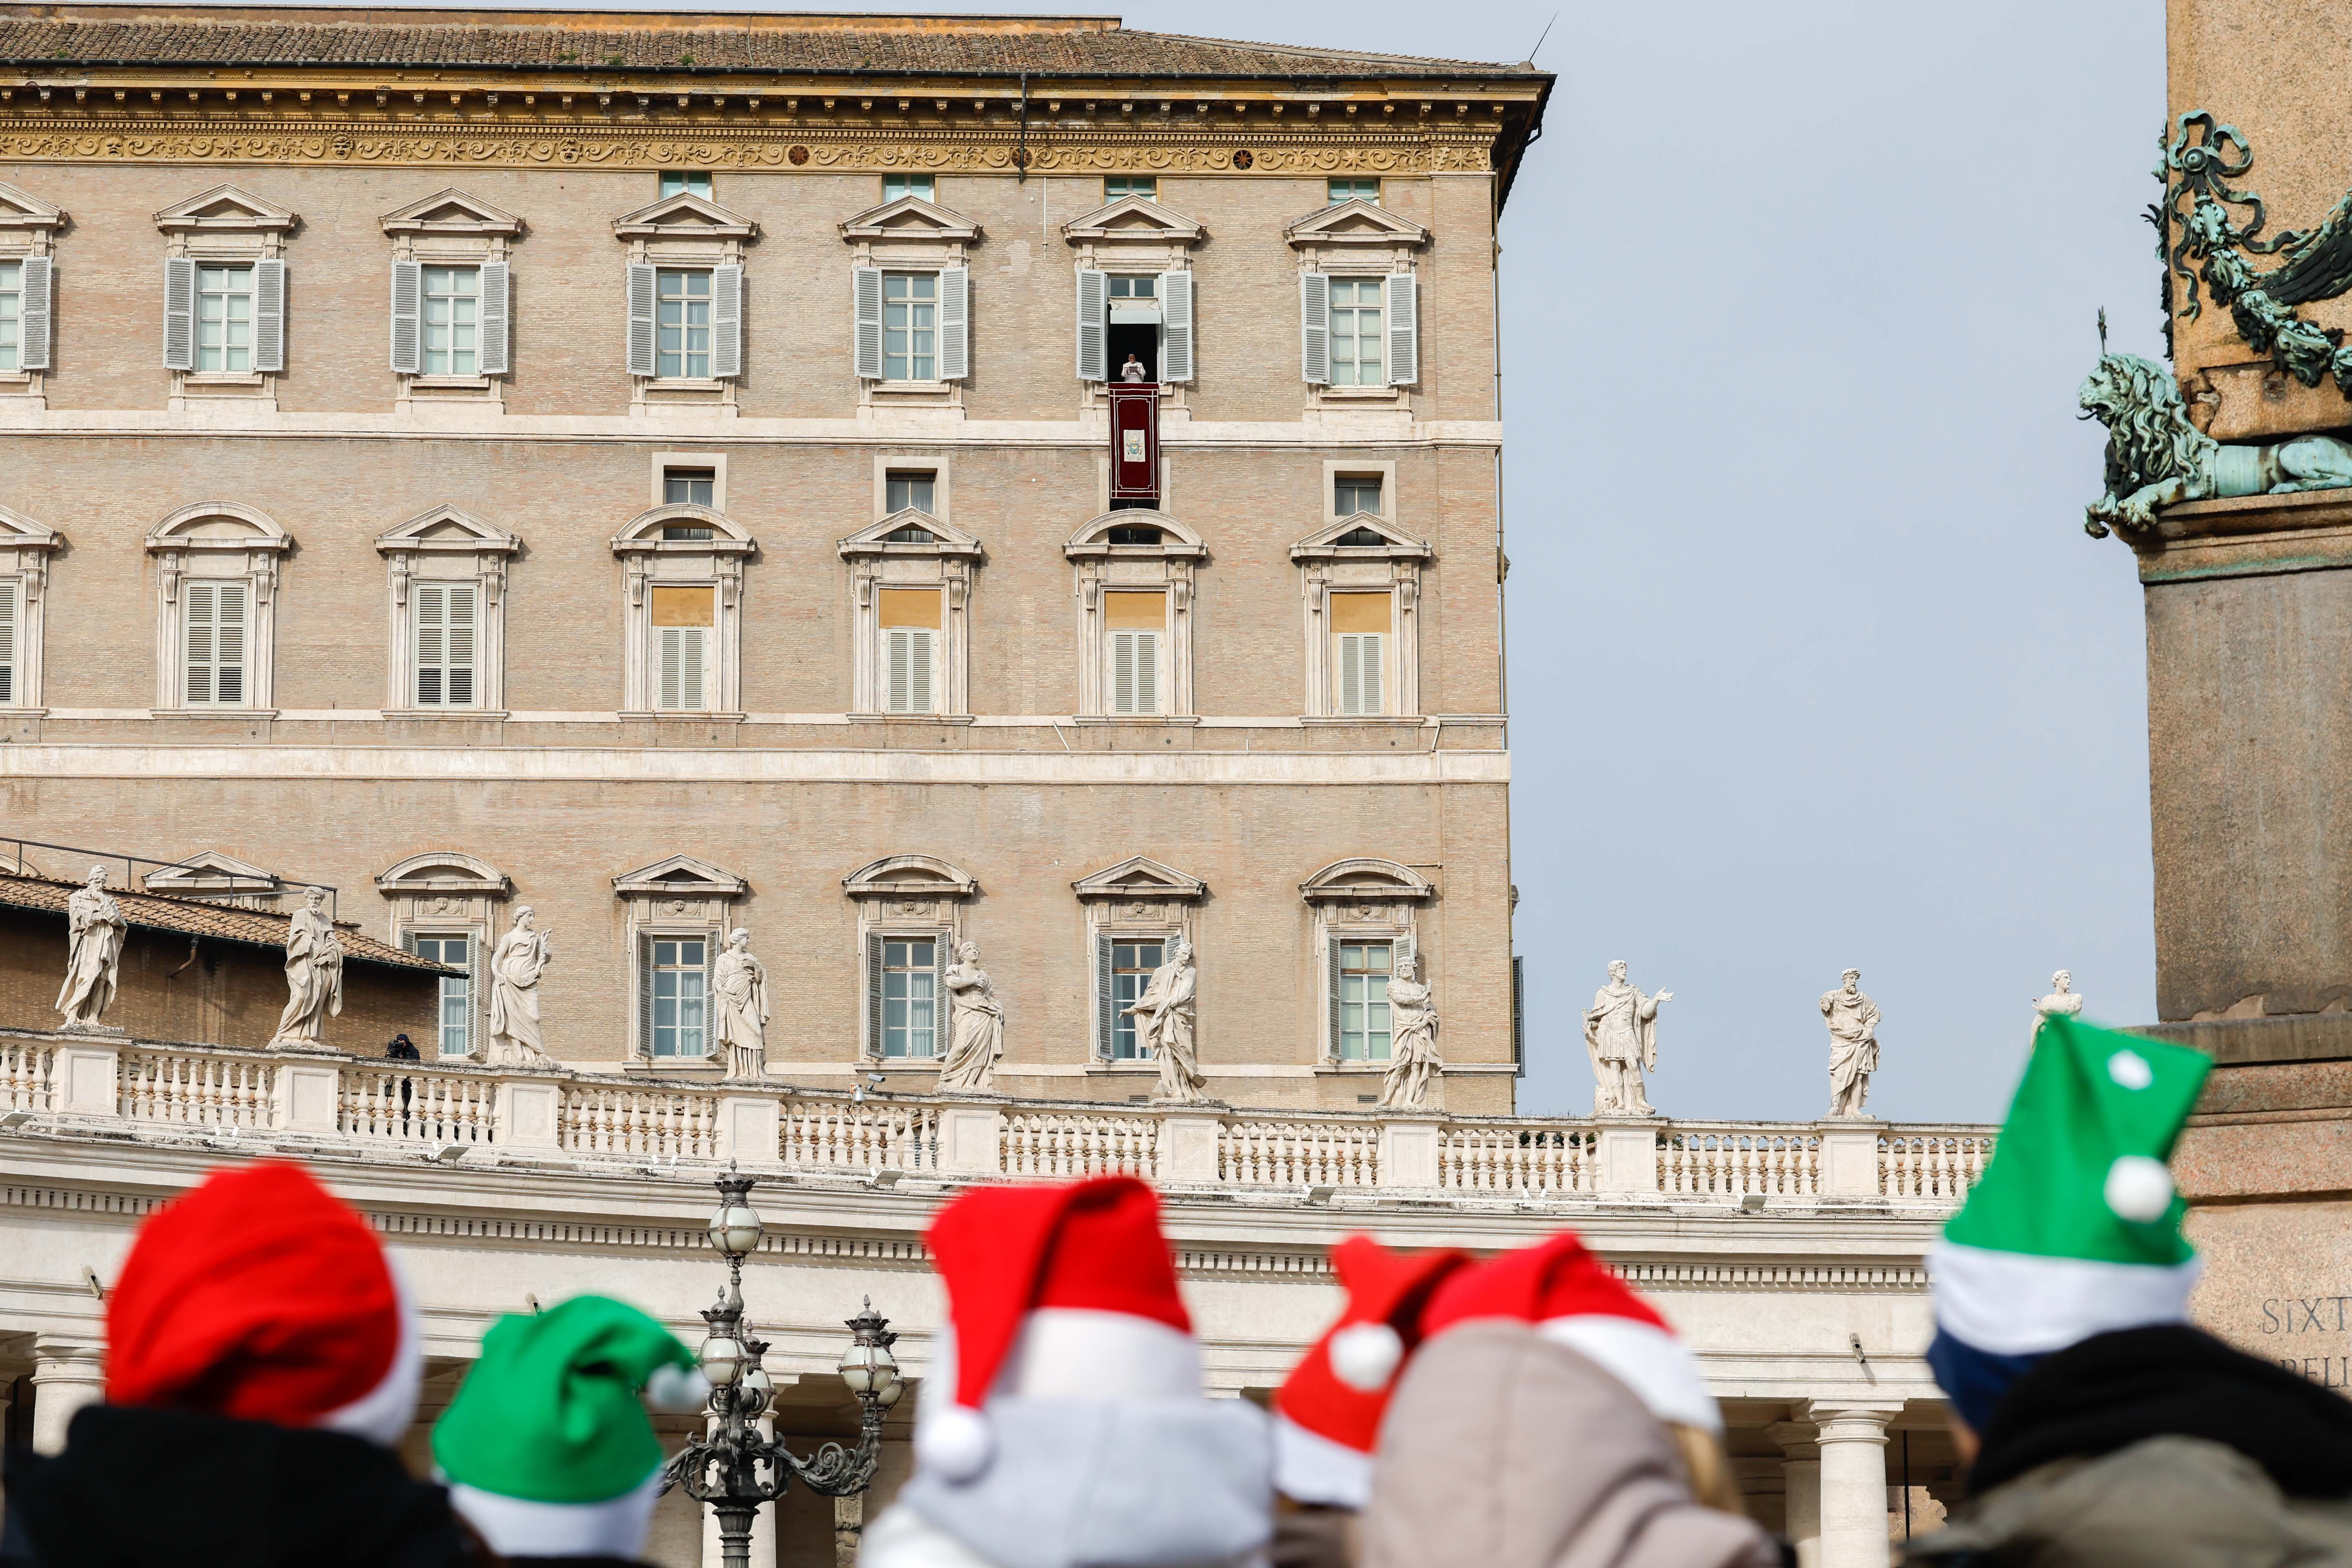 Visitors in St. Peter's Square wear Christmas hats.